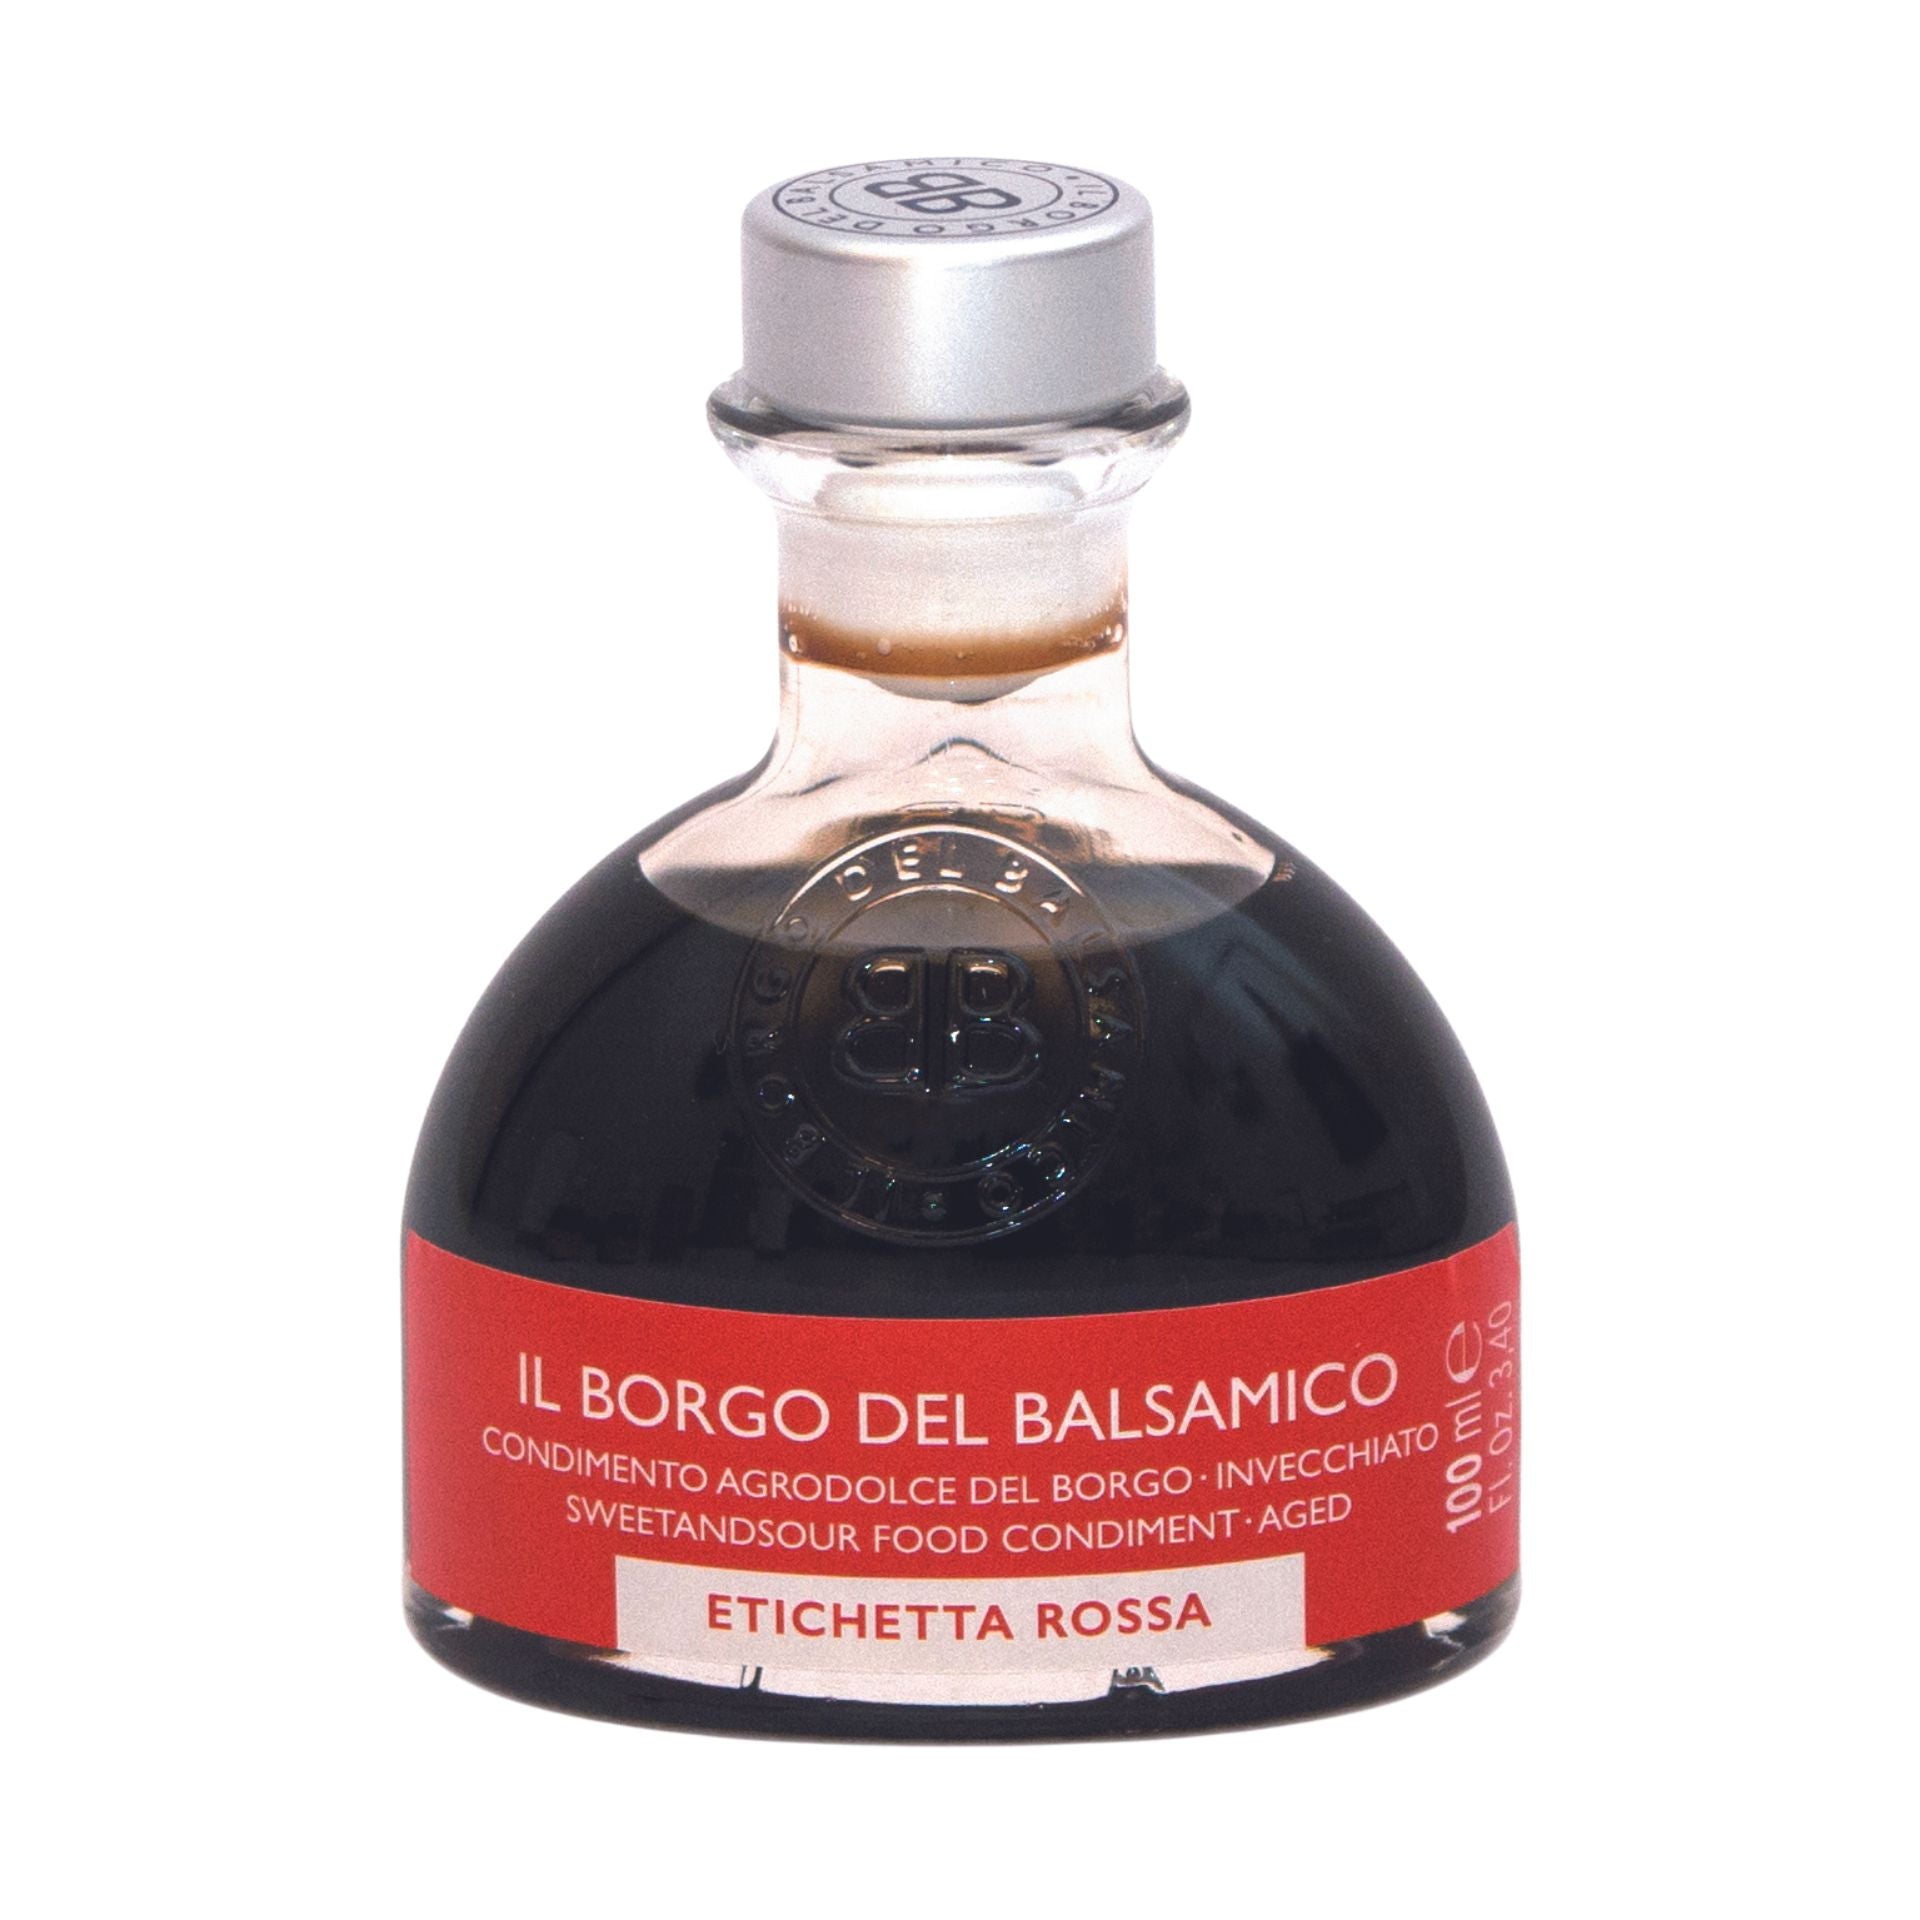 Il Borgo del Balsamico Aged Balsamic Condiment Red Label Low Acidity (Oval bottle without box) 100ml  | Imported and distributed in the UK by Just Gourmet Foods